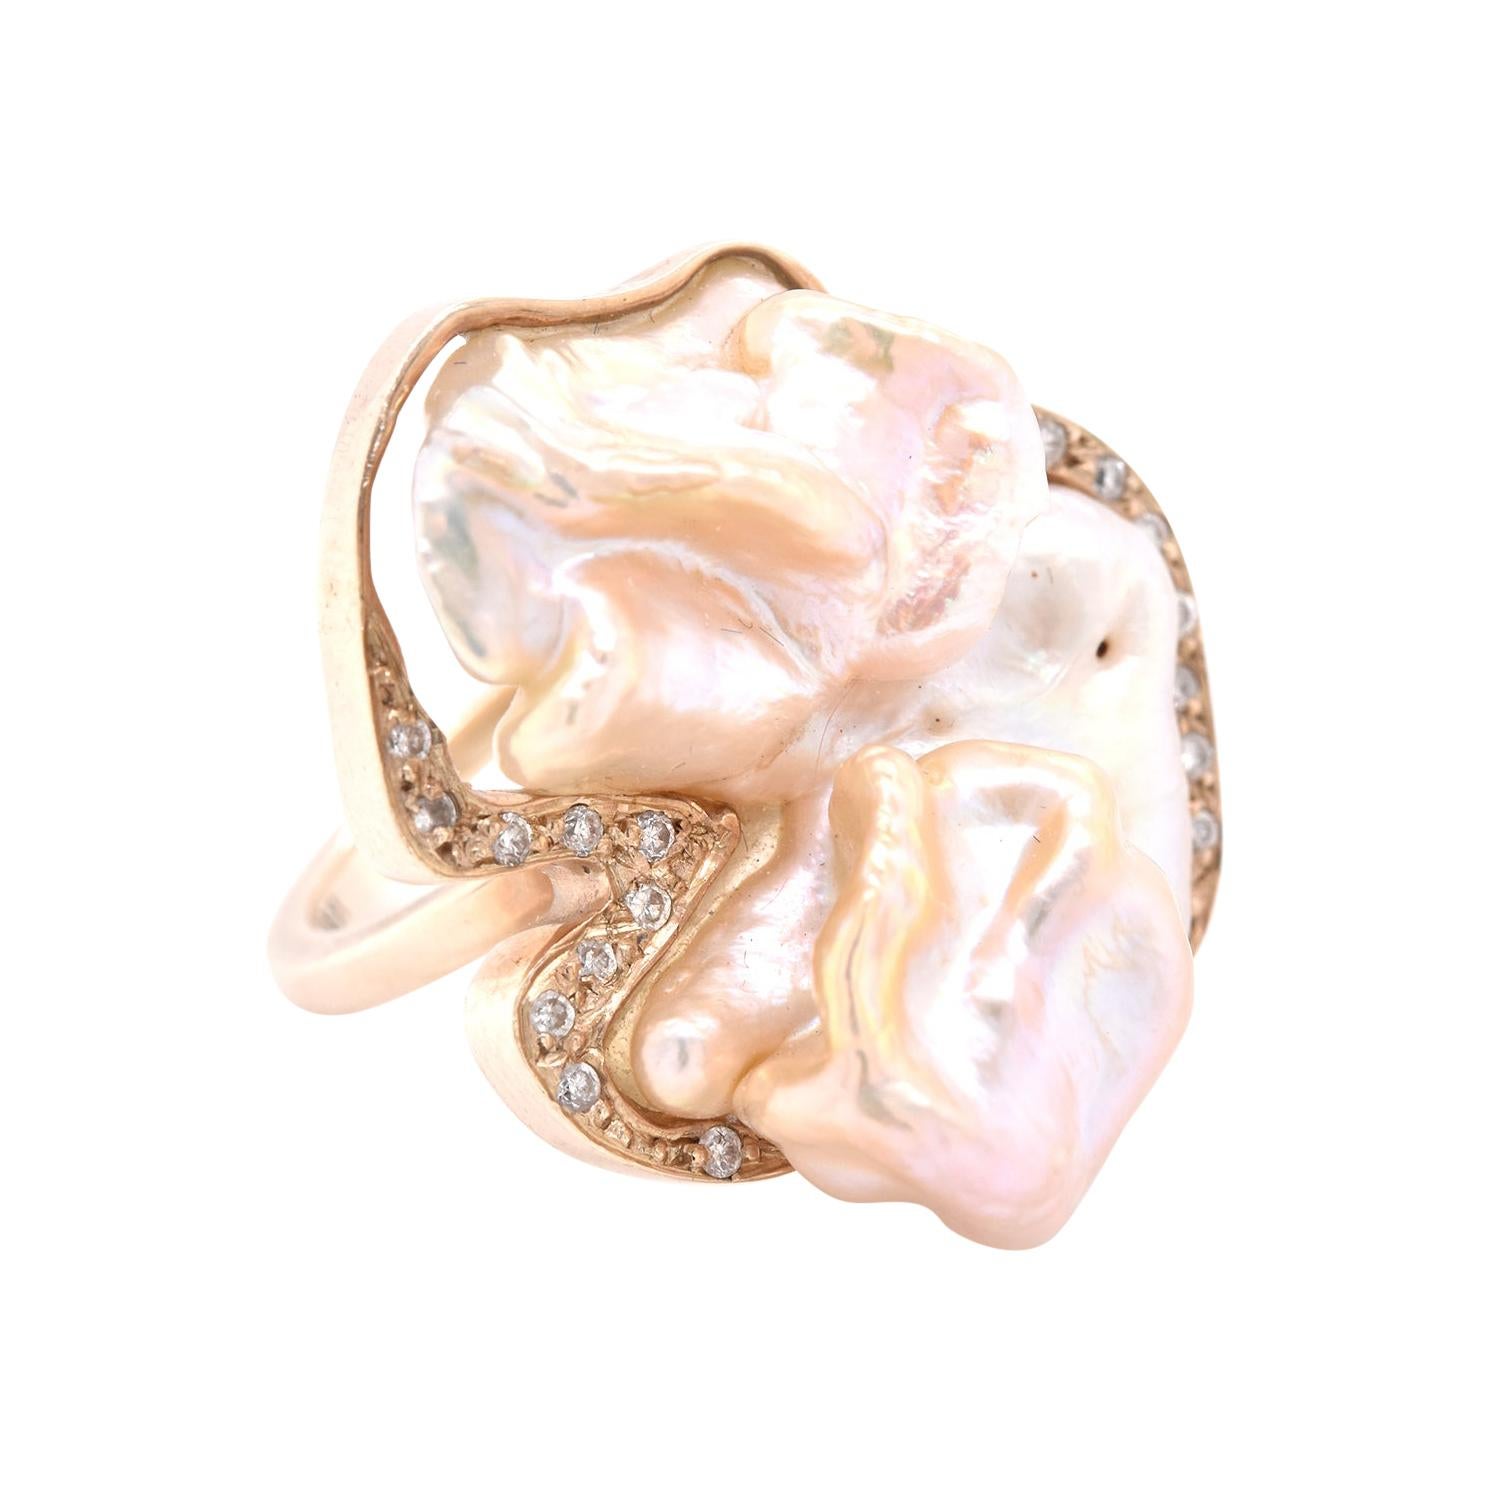 9 Karat Yellow Gold Freeform Mother of Pearl and Diamond Ring